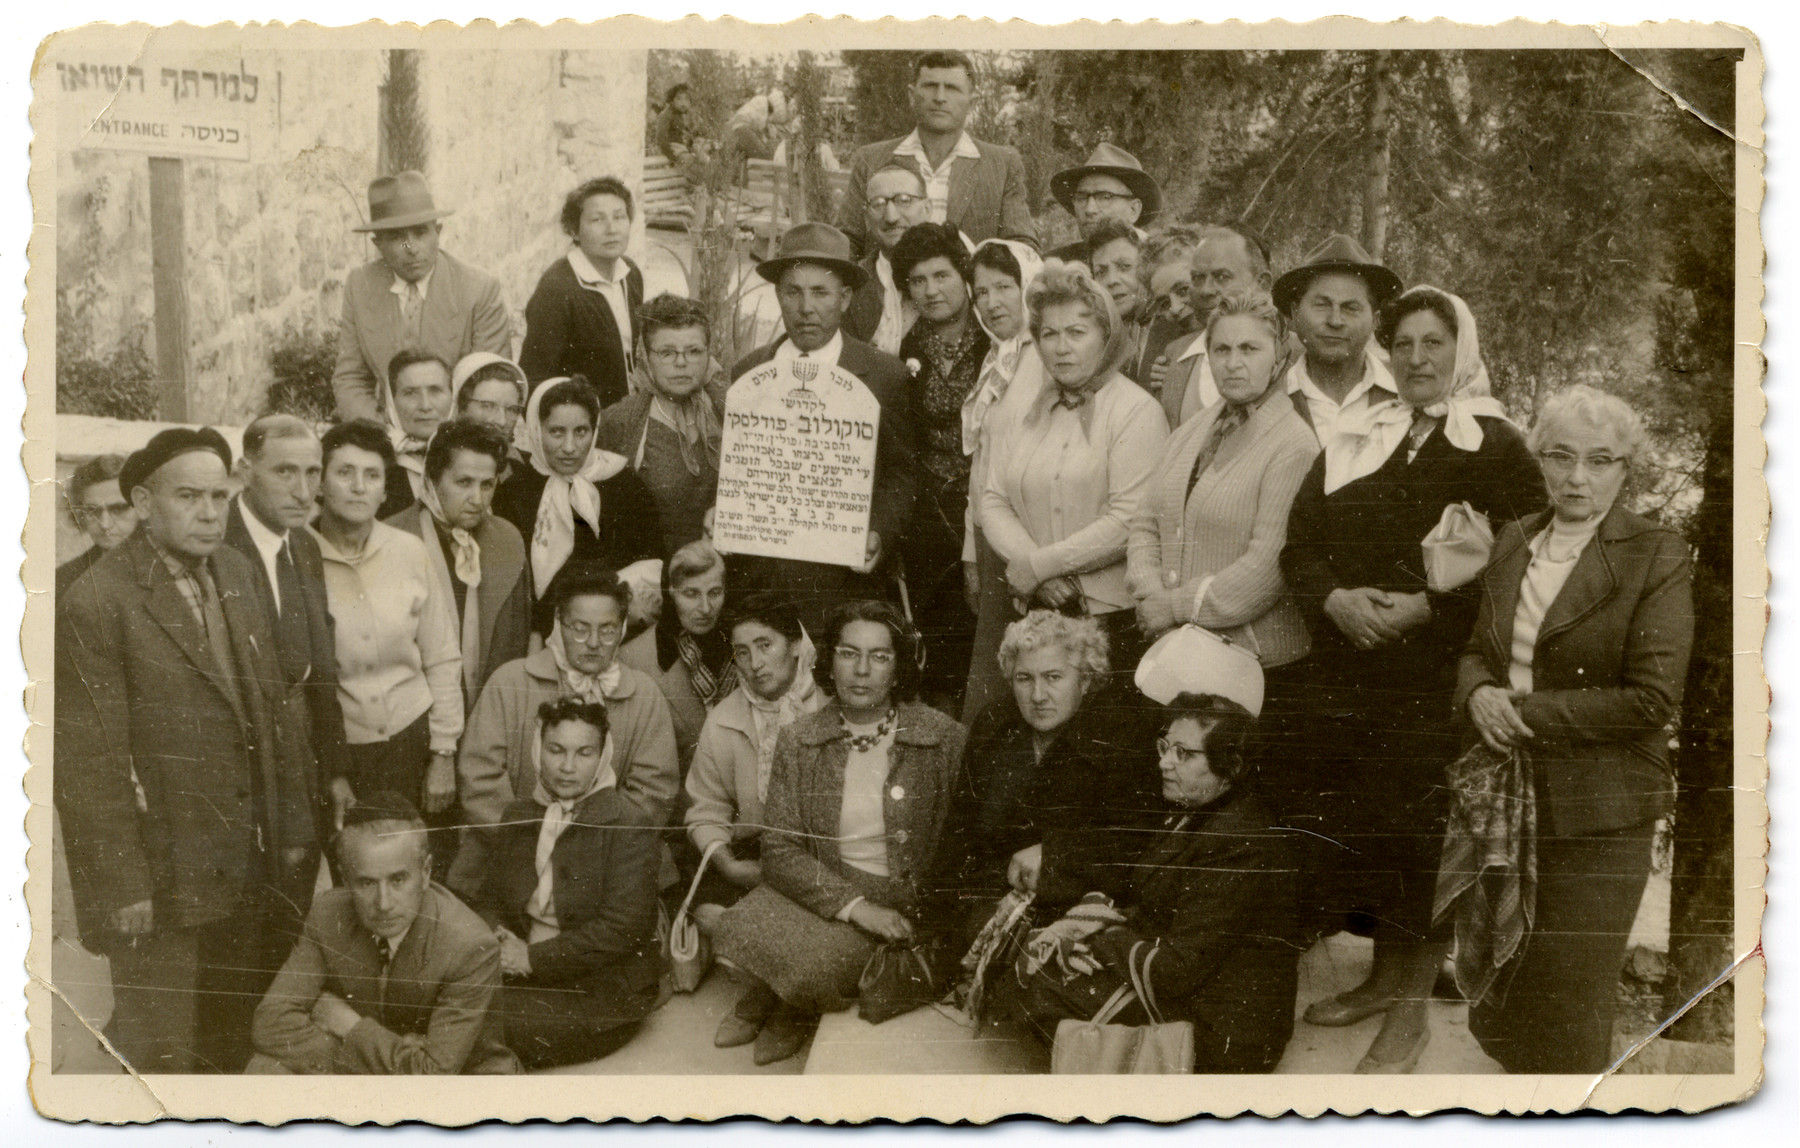 Survivors of Sokolow Podlaski pose around a makeshift tombstone during a memorial service for the Holocaust victims of the town.

Shoshana Feldman (sister of Mendel) is among those pictured.  She immigrated to Palestine before the war is part of the group.

Also pictured is Srul Szczerb, seen  holding the plaque. His sister, Malka  (Szczerb) Goldschmidt  is standing to his right (wearing a scarf and glasses). The two survived the war in Russia and then immigrated to Israel afterwards.  Their younger sister, Cywia (Szczerb) Elster, had been hiding in the farms around the town of Sokolow and was turned in to the Germans by a farmer named Oziemblo six months before the end of the war. The Germans brought her into the town and then shot her. Cywia's children,  Irene  and Aaron Elster survived.